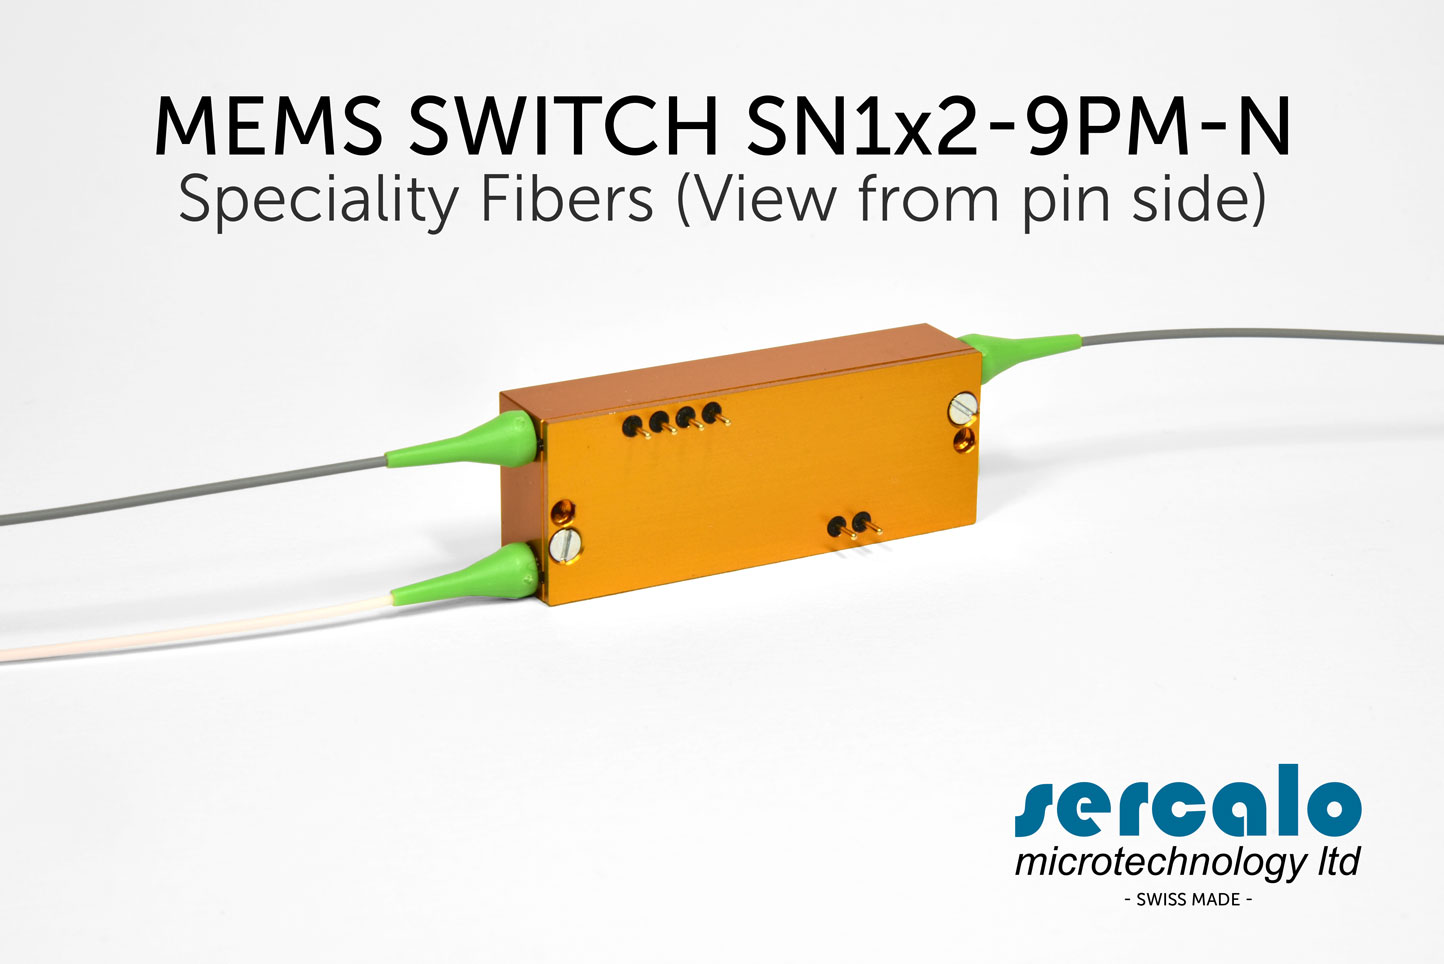 OPTICAL MEMS SWITCHES SPECIALTY FIBERS SN1xN-9PM-N